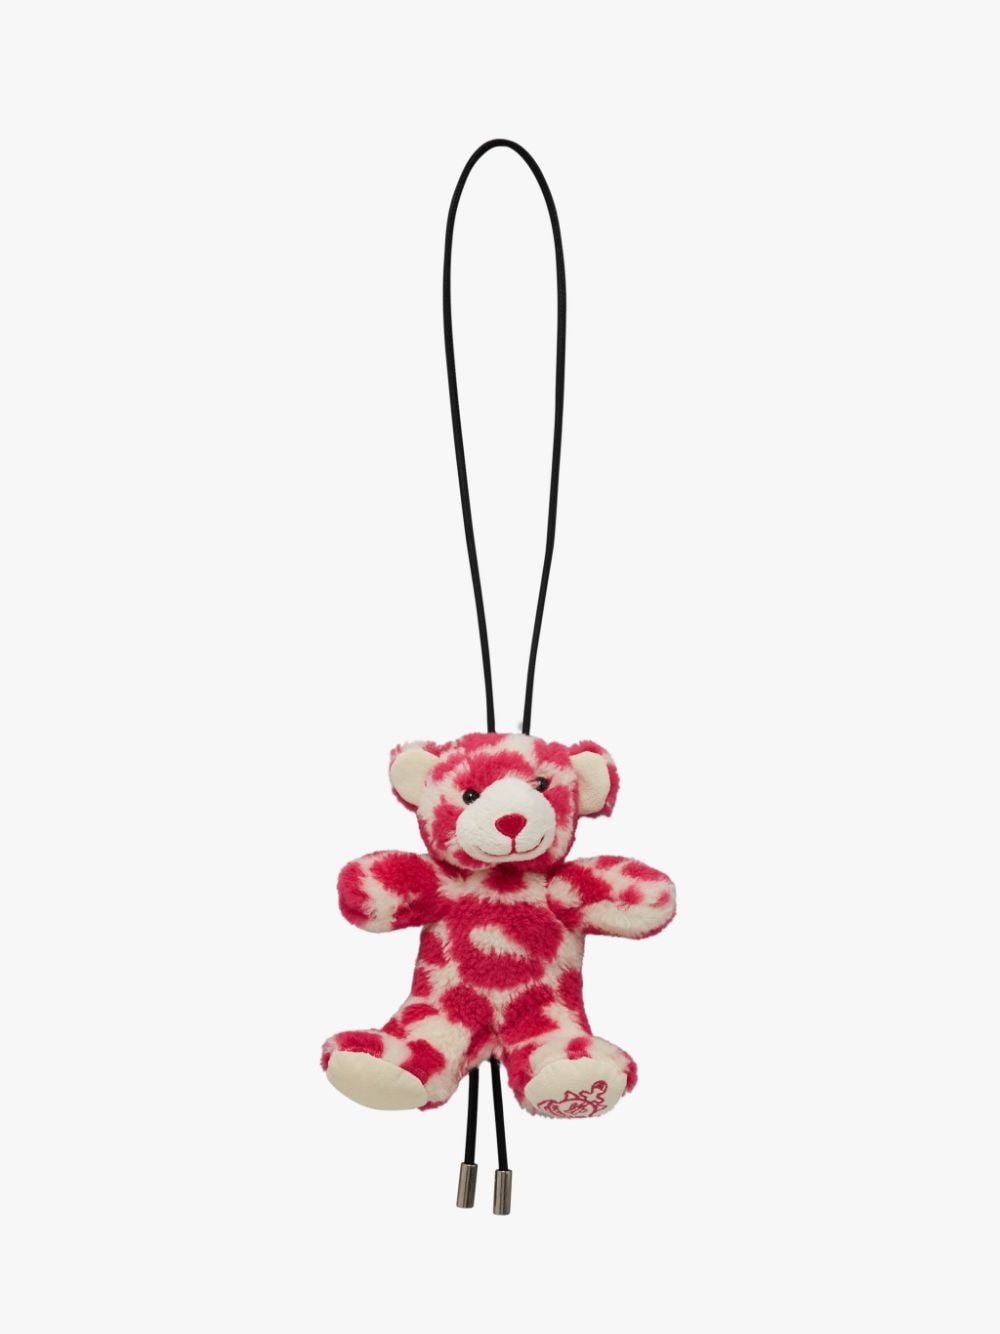 1 MONCLER JW ANDERSON TEDDY CHARM - 1